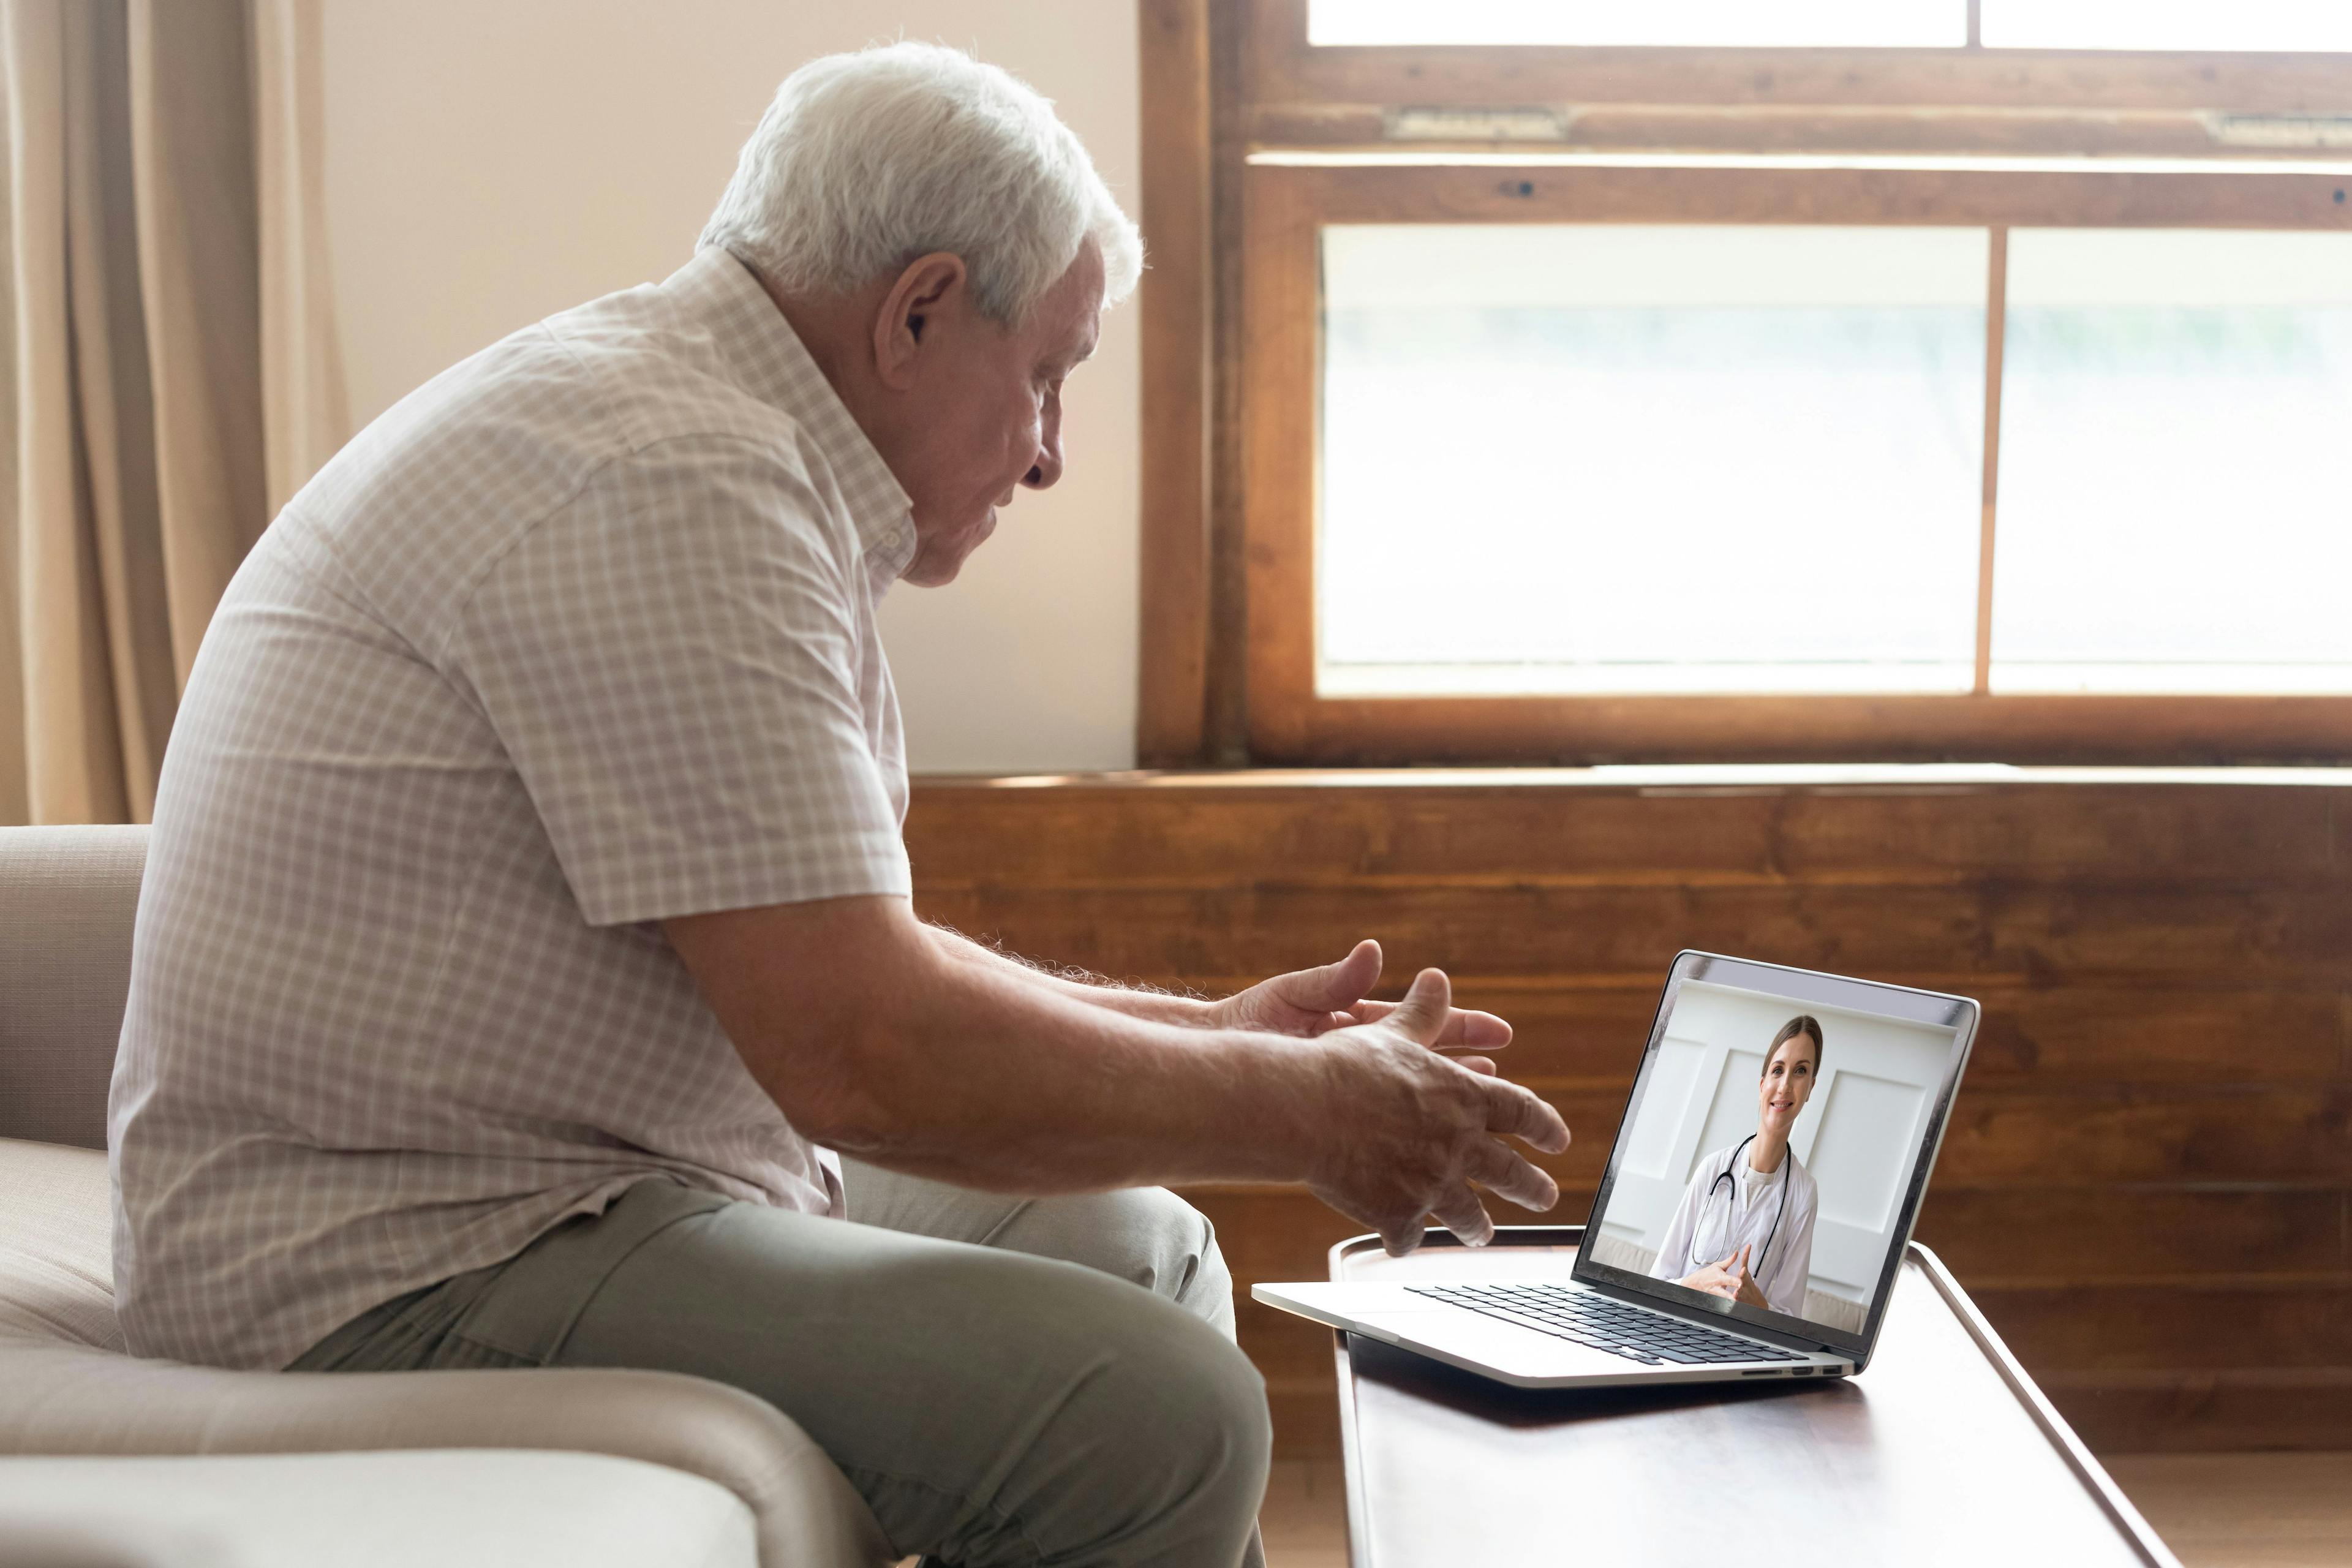 Medicare Telehealth Visits Exceeded 52 million in 2020